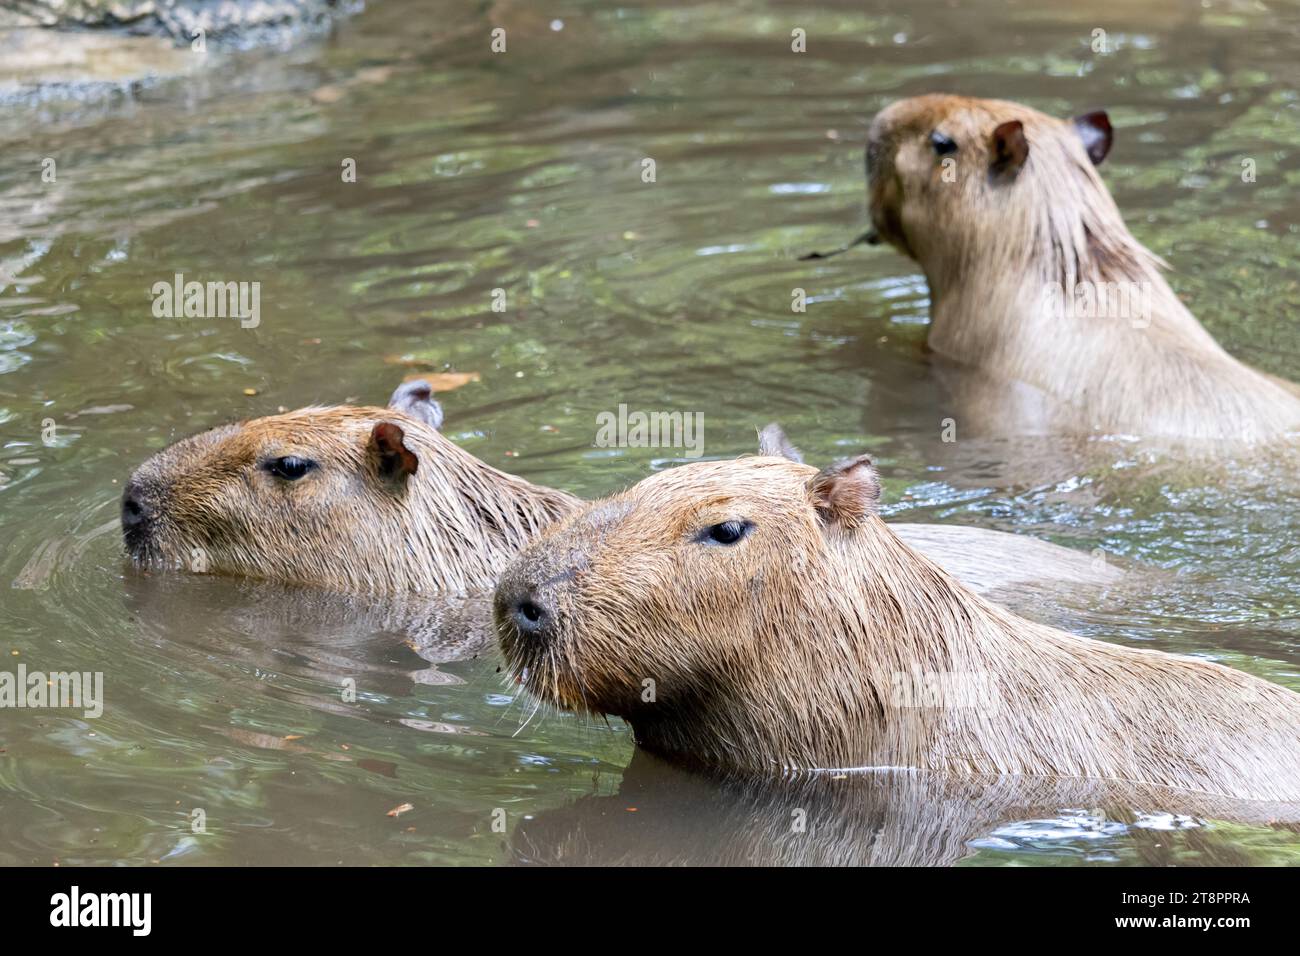 San Diego Zoo - The word capybara means master of the grass and its  scientific name, Hydrochoerus, means water hog because of its love for  water. The capybara, however, is not a